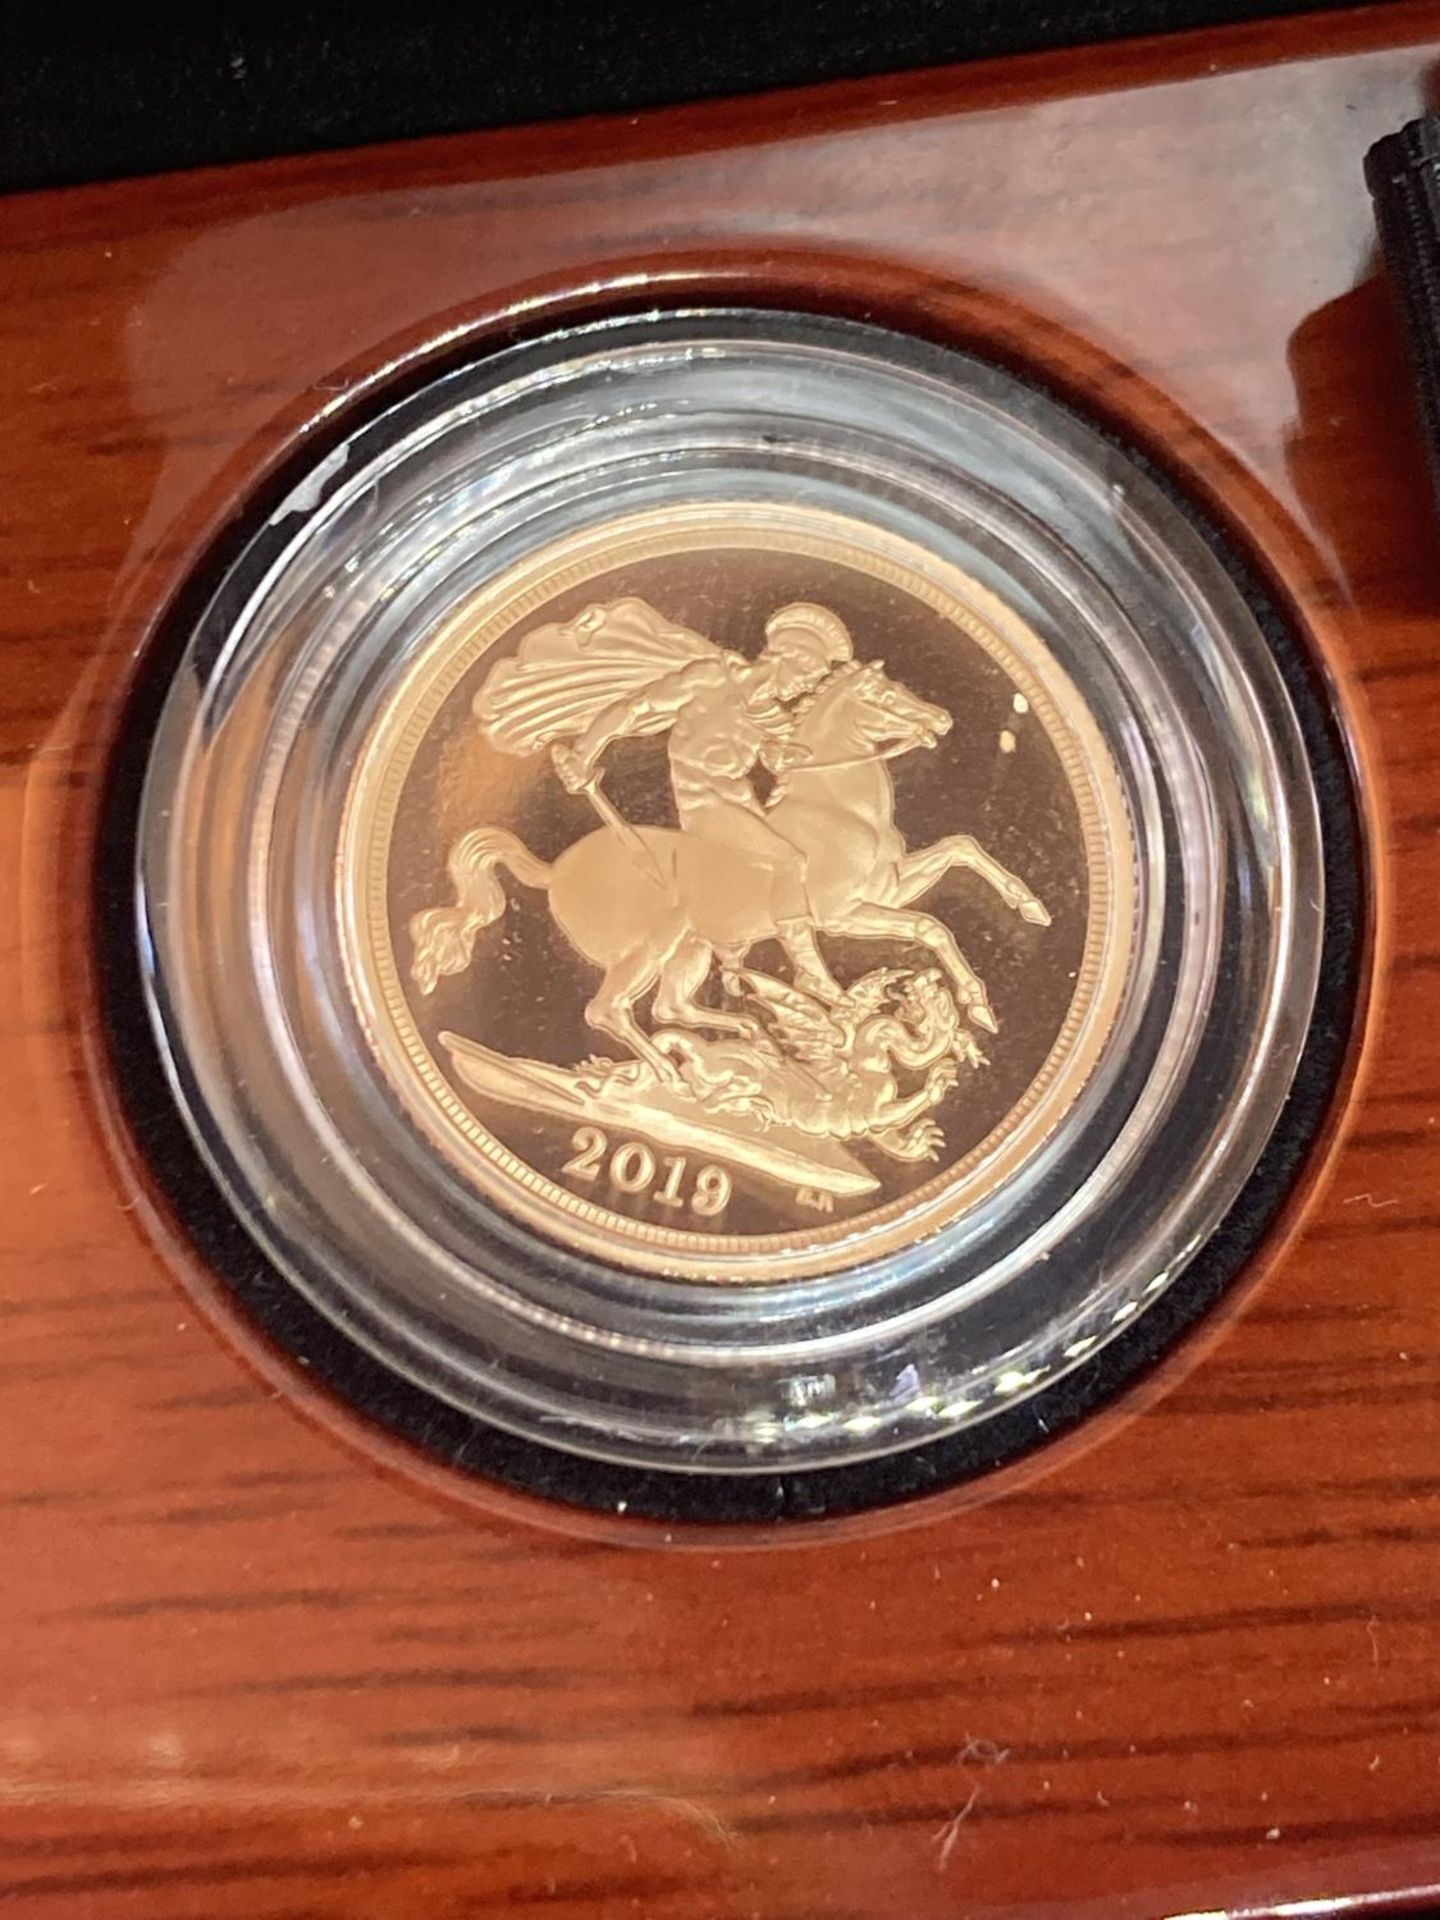 A 2019 THE SOVEREIGN GOLD PROOF LIMITED EDITION NUMBER 6,312 OF 9,500 IN A WOODEN BOXED CASE - Bild 2 aus 5